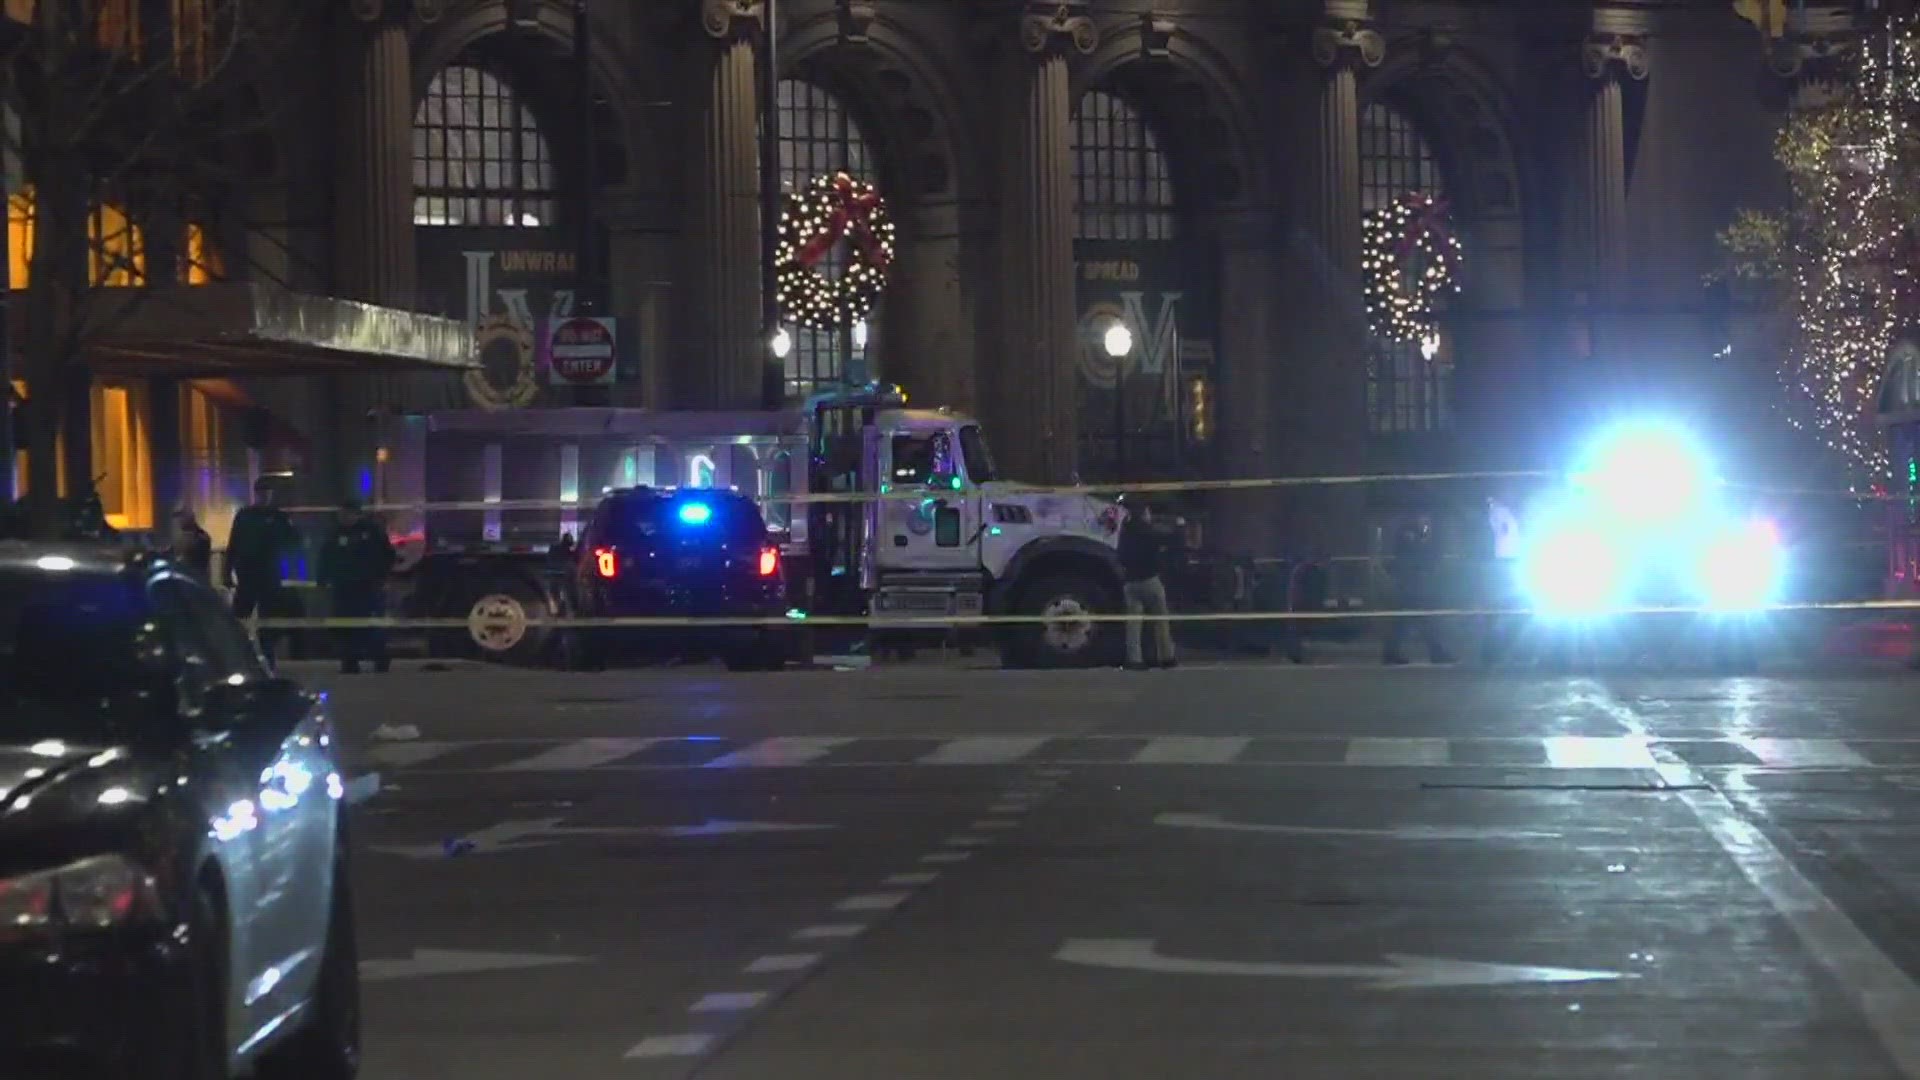 Two teens were injured following a shooting in Public Square, just hours after the WinterLand Christmas tree lighting.